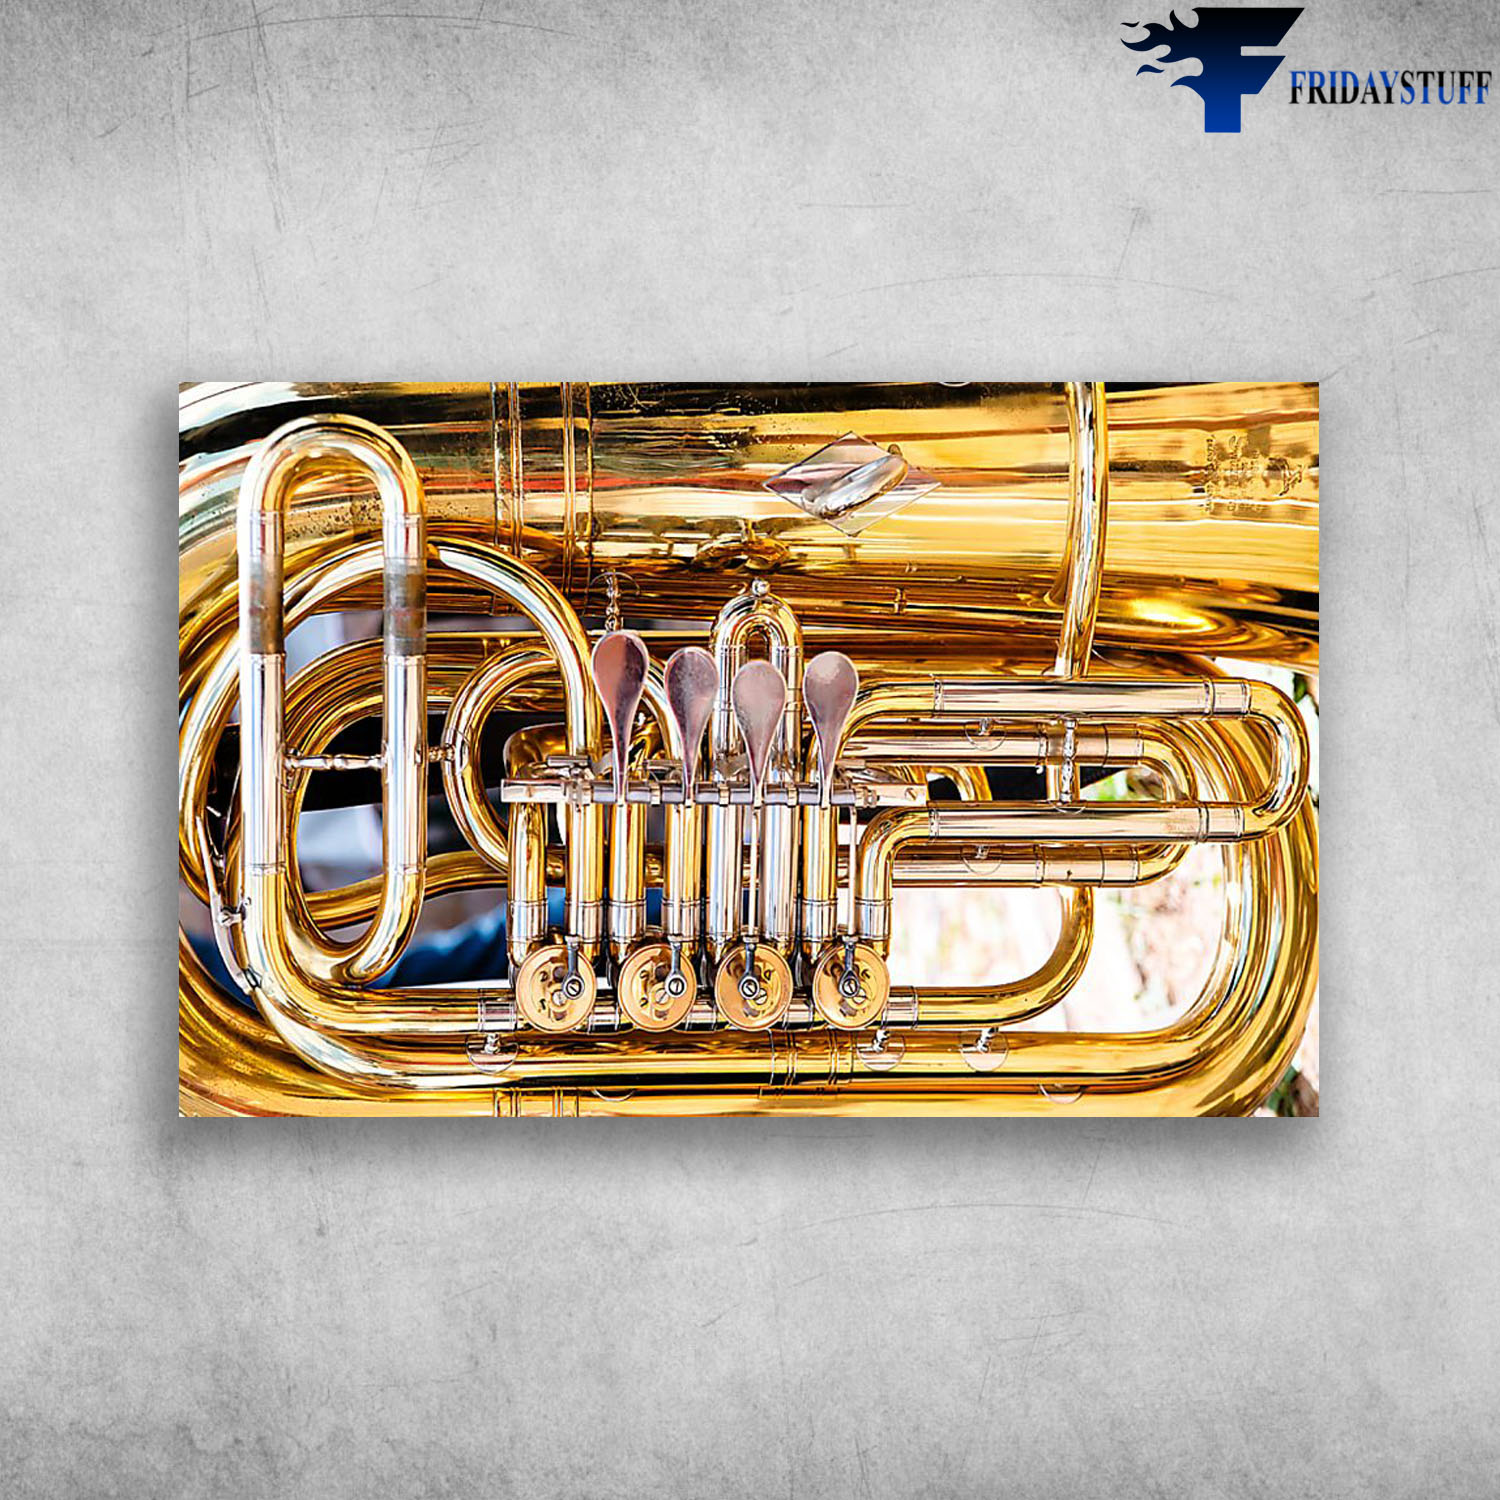 Tuba Addicts Tuba Musical Instrument The Tuba Is Certainly The Most Intestinal Of Instruments